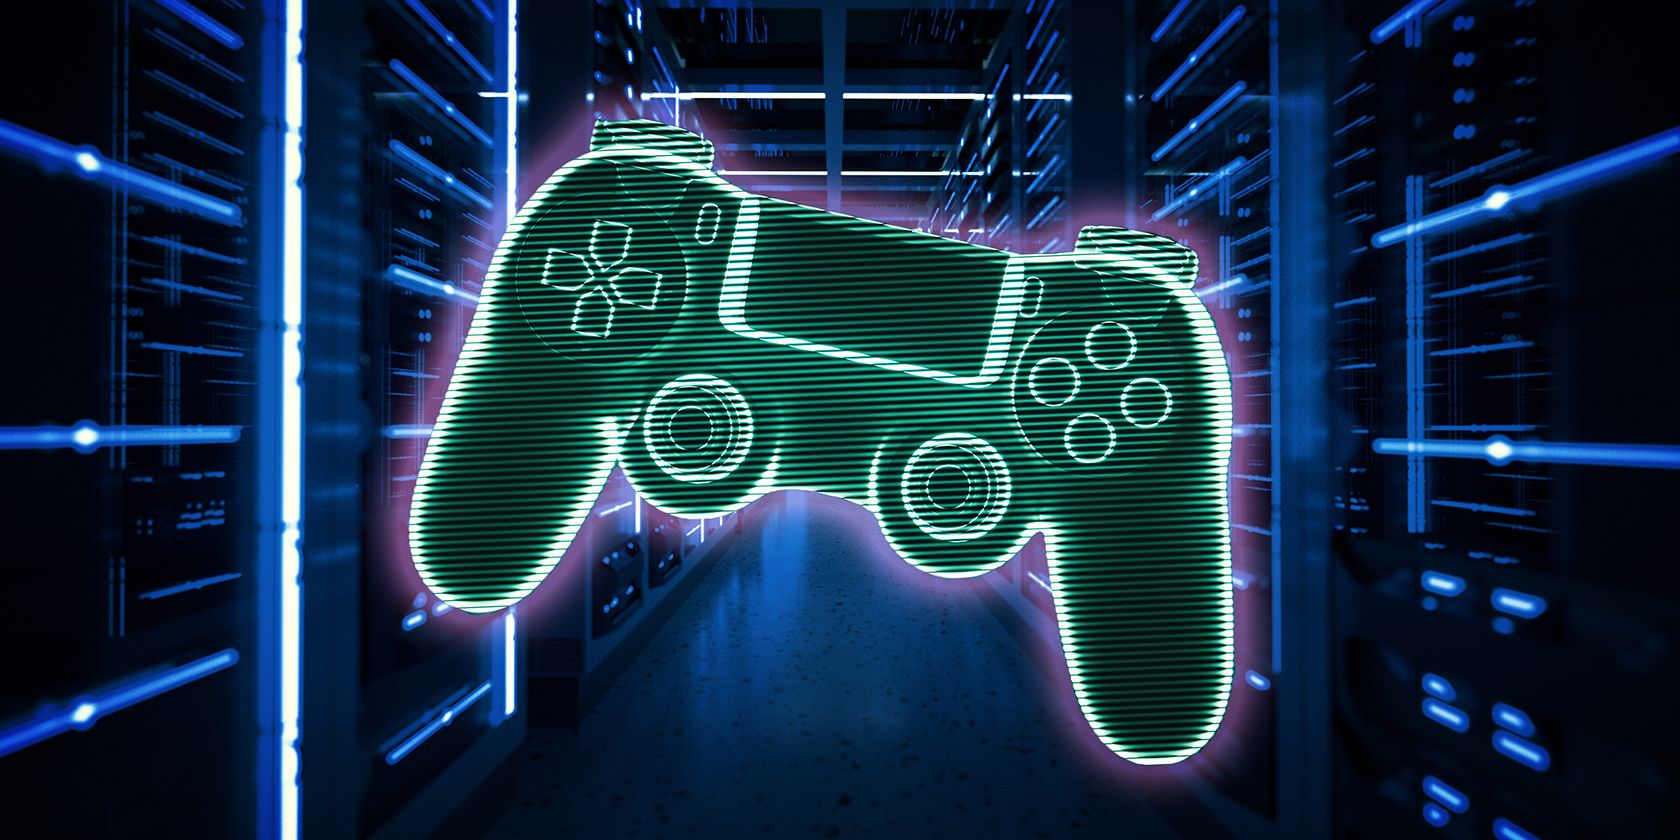 A neon green outline of a game controller floats in a blue-lit server room hallway.